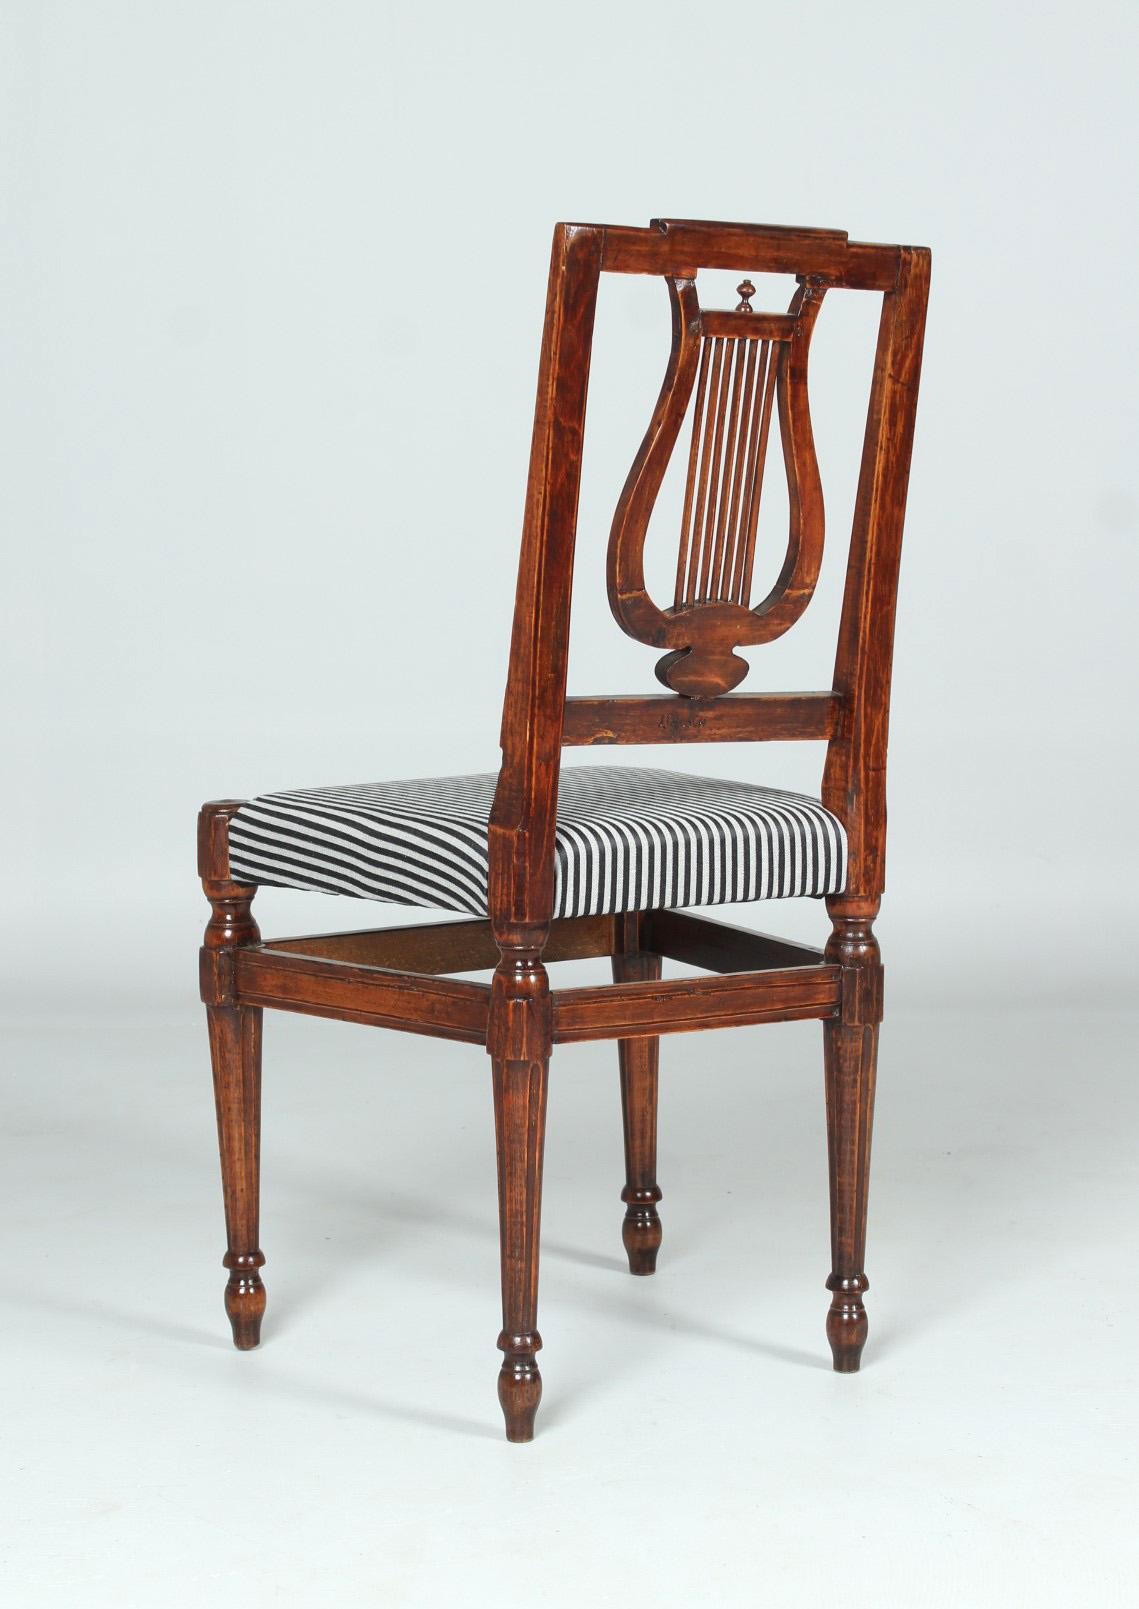 Walnut Early 19th Century Lyre-Chair For Sale